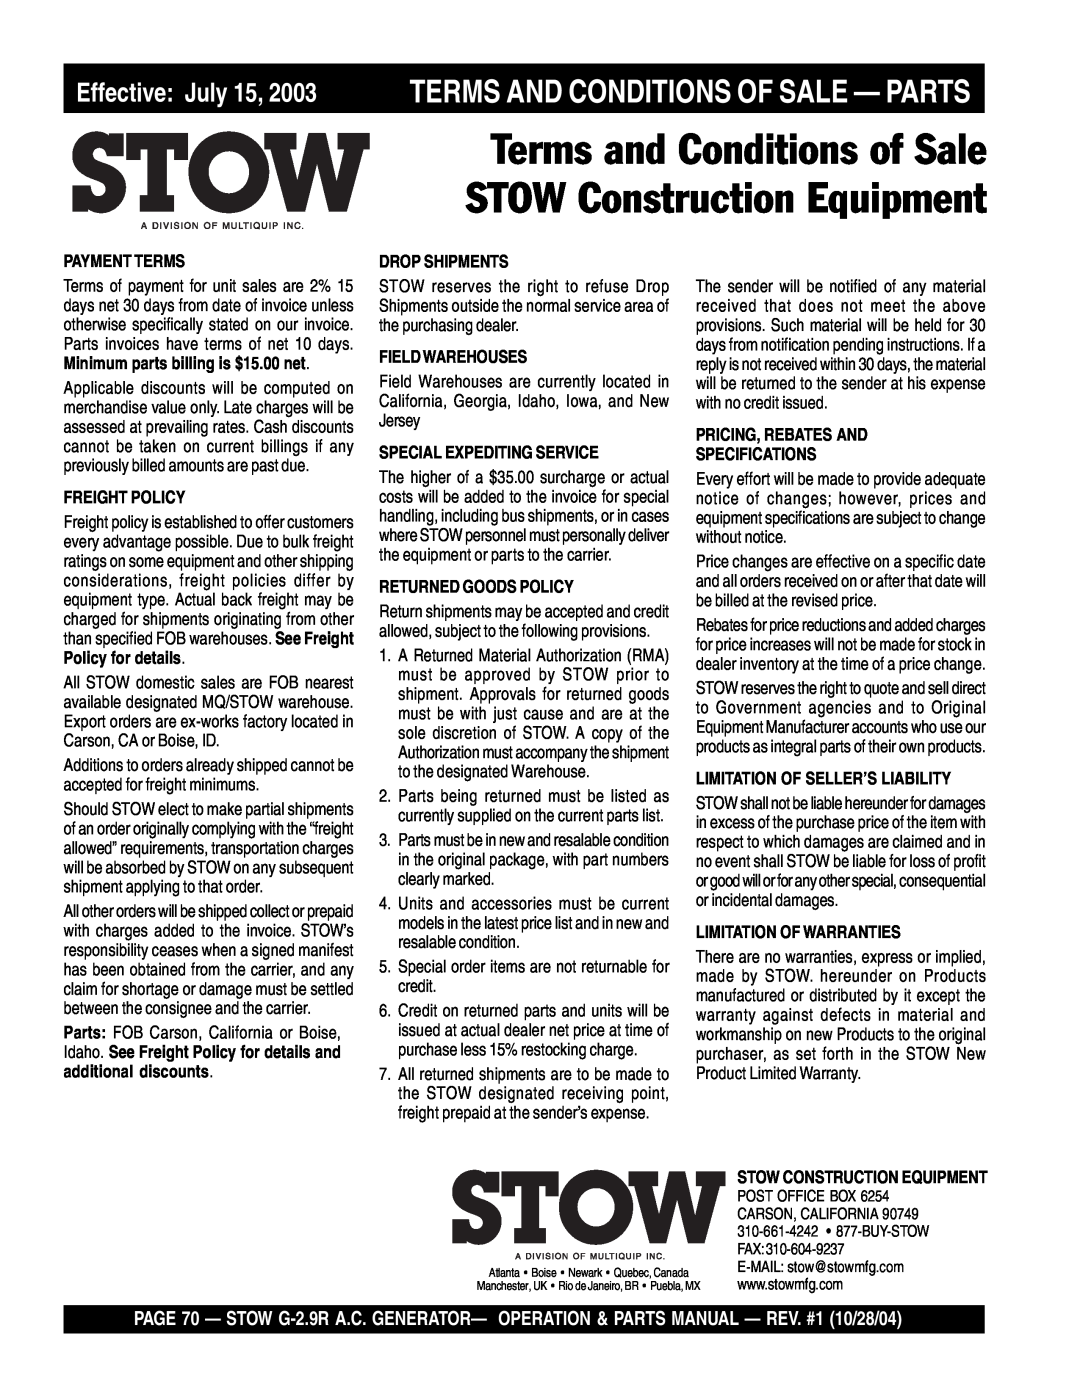 Stow G-2.9R manual Terms And Conditions Of Sale - Parts, Effective July 15 